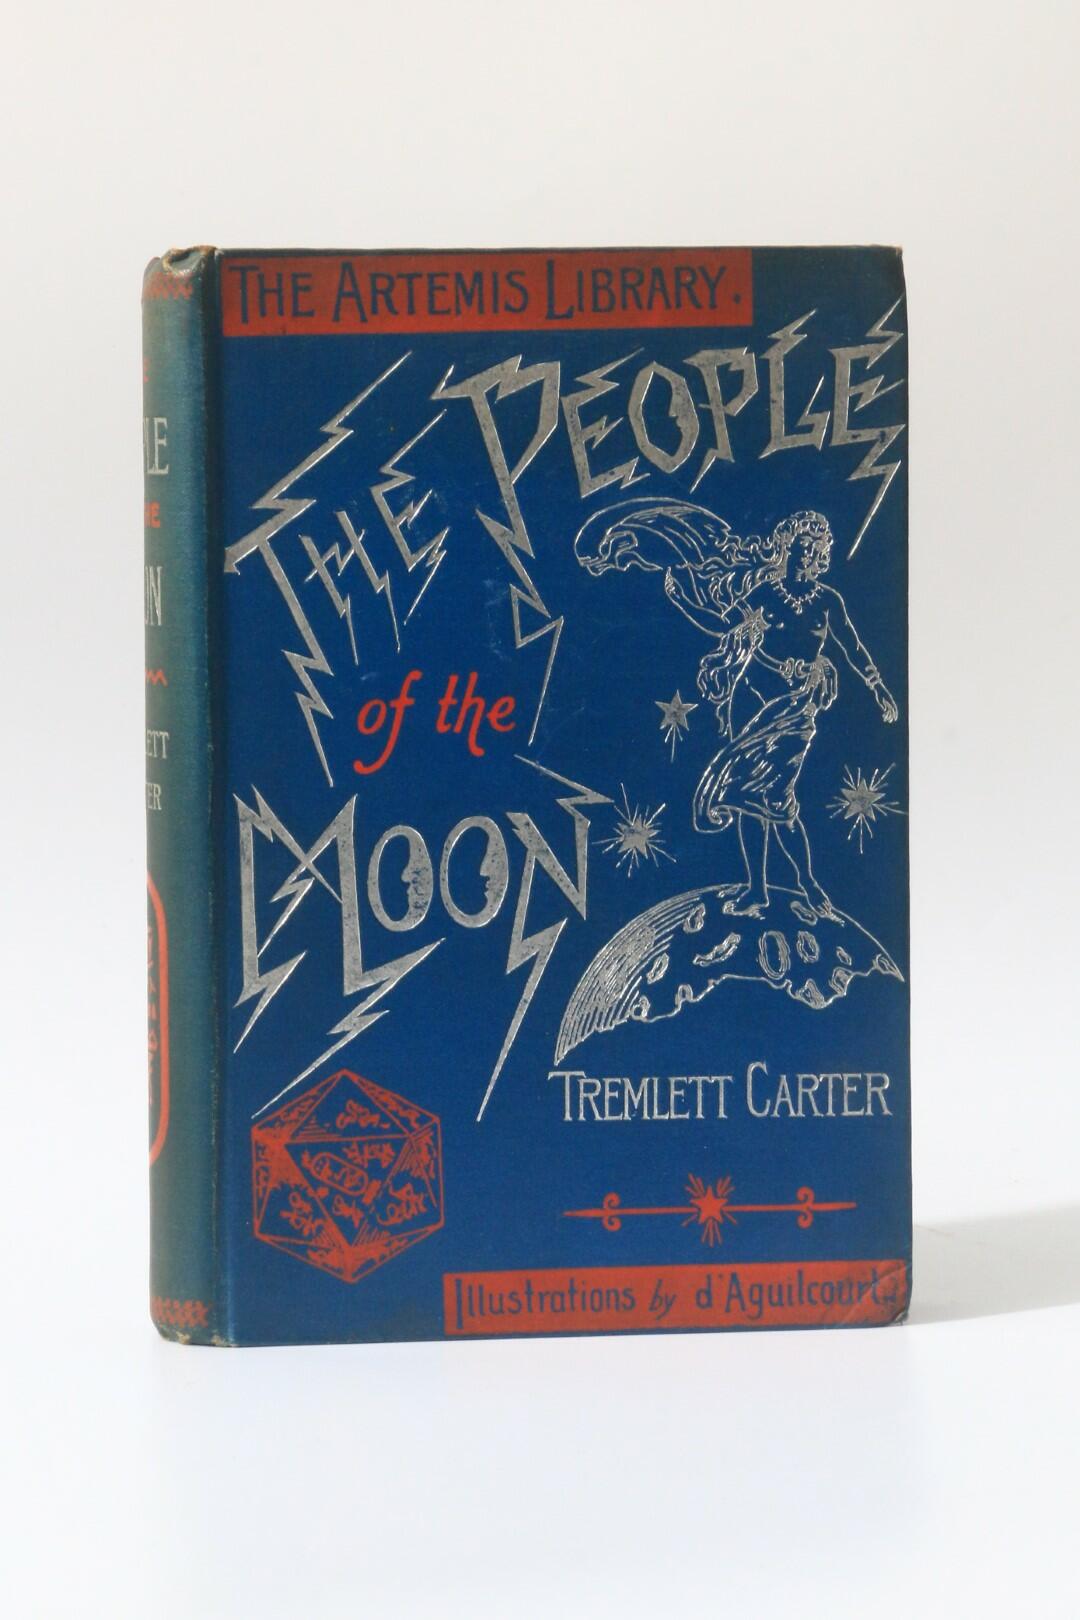 Tremlett Carter - The People of the Moon - "The Electrician" Printing and Publishing Company with Simpkin Marshall, Hamilton, Kent & Co., nd [1890], First Edition.